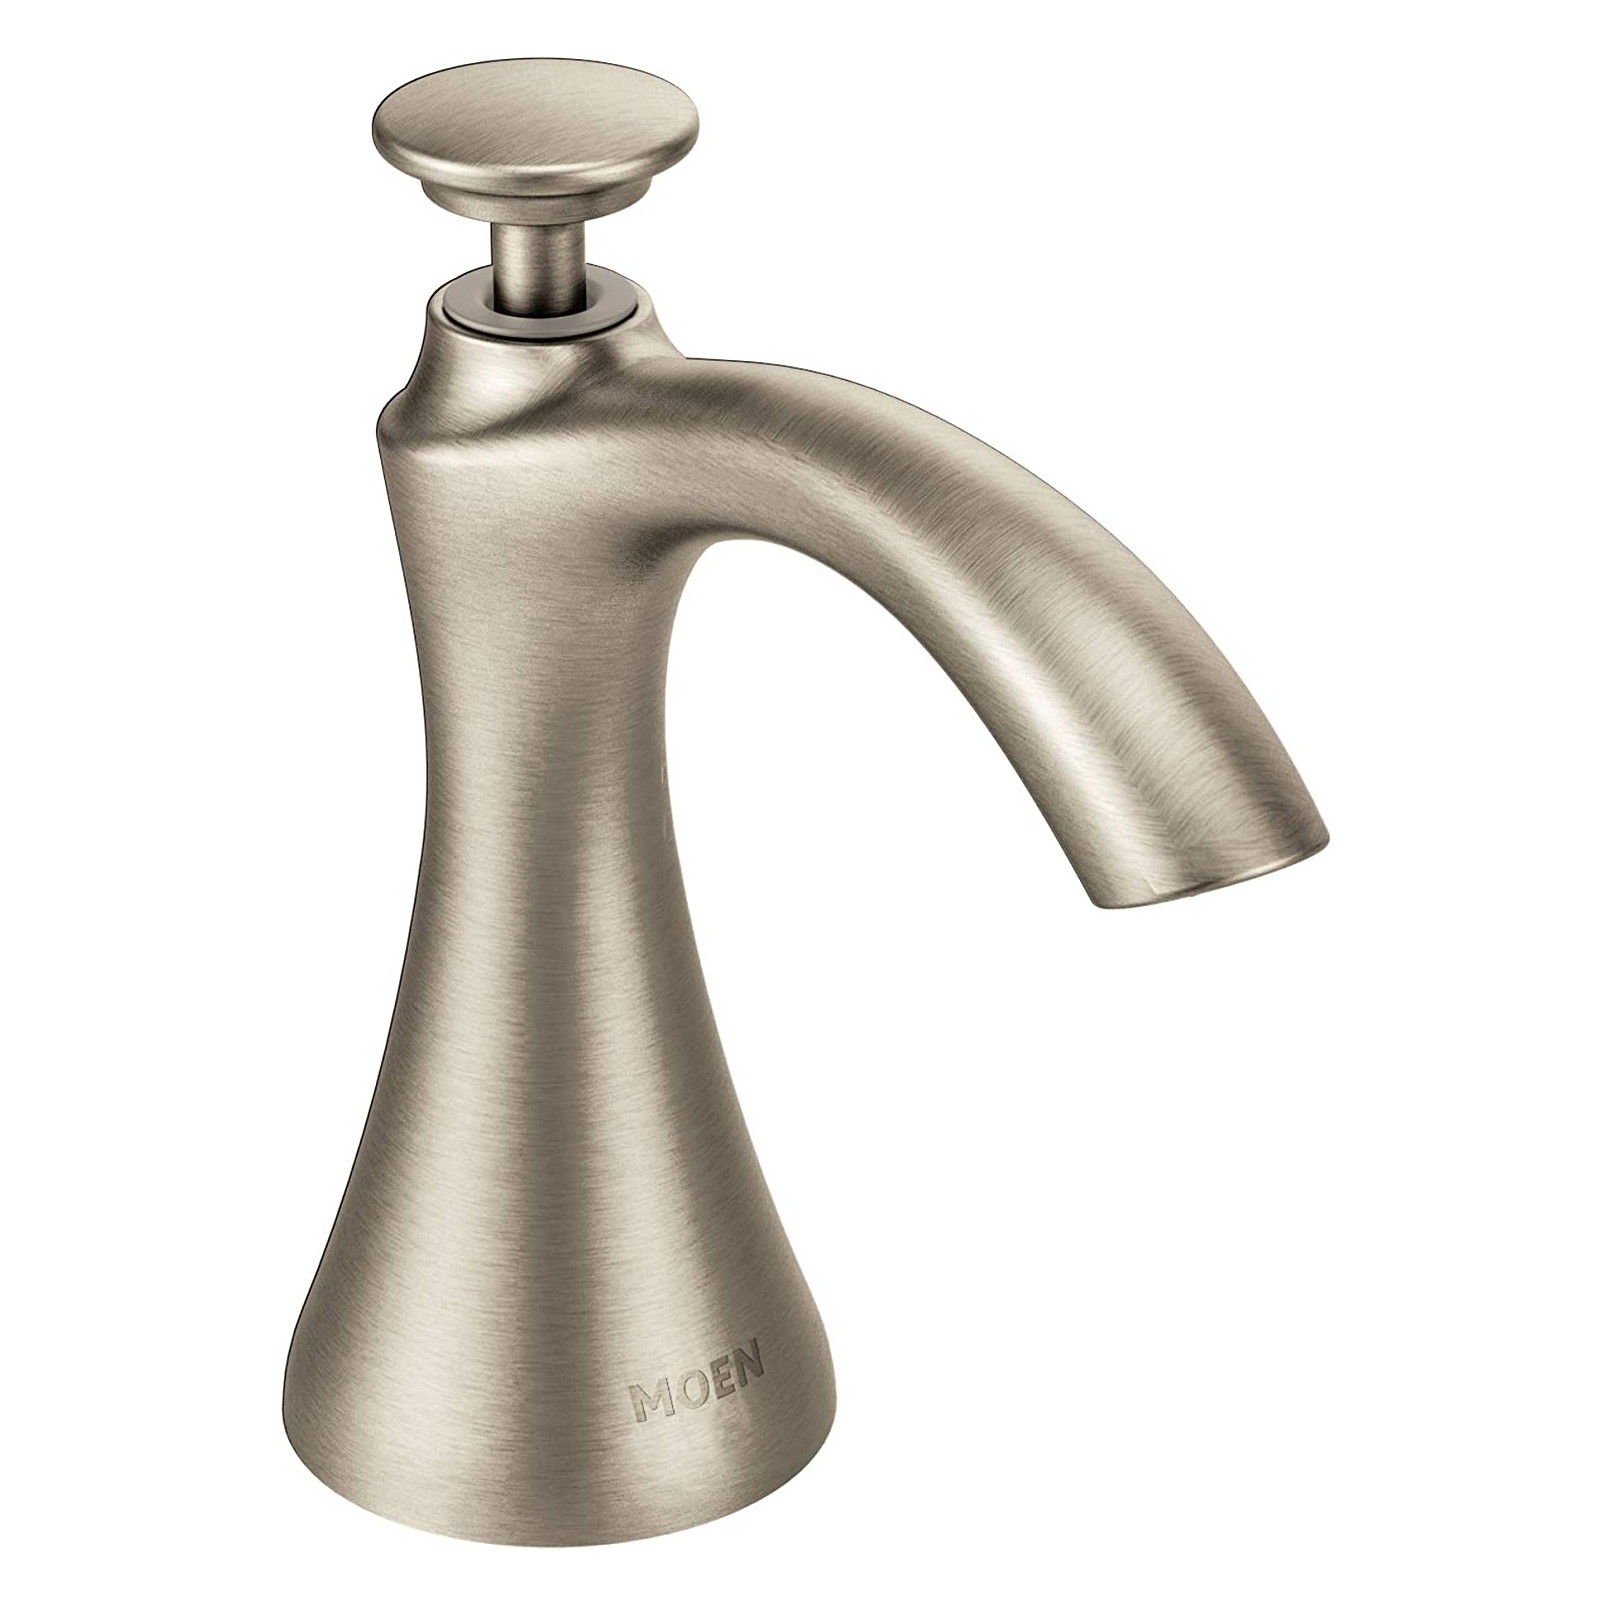 Transitional Soap/Lotion Dispenser in Polished Nickel